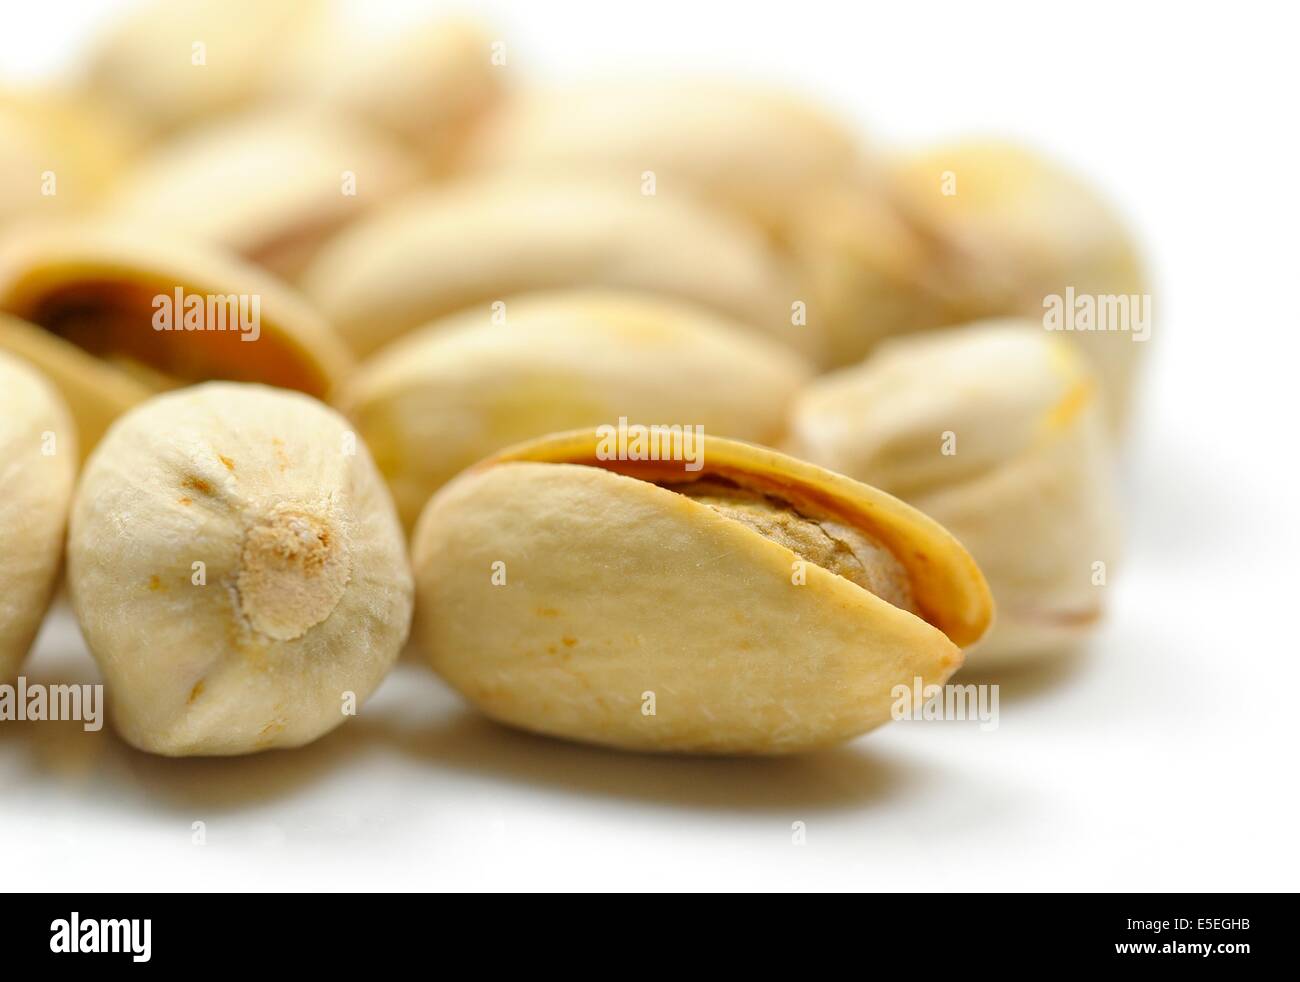 Roasted and salted pistachios Stock Photo